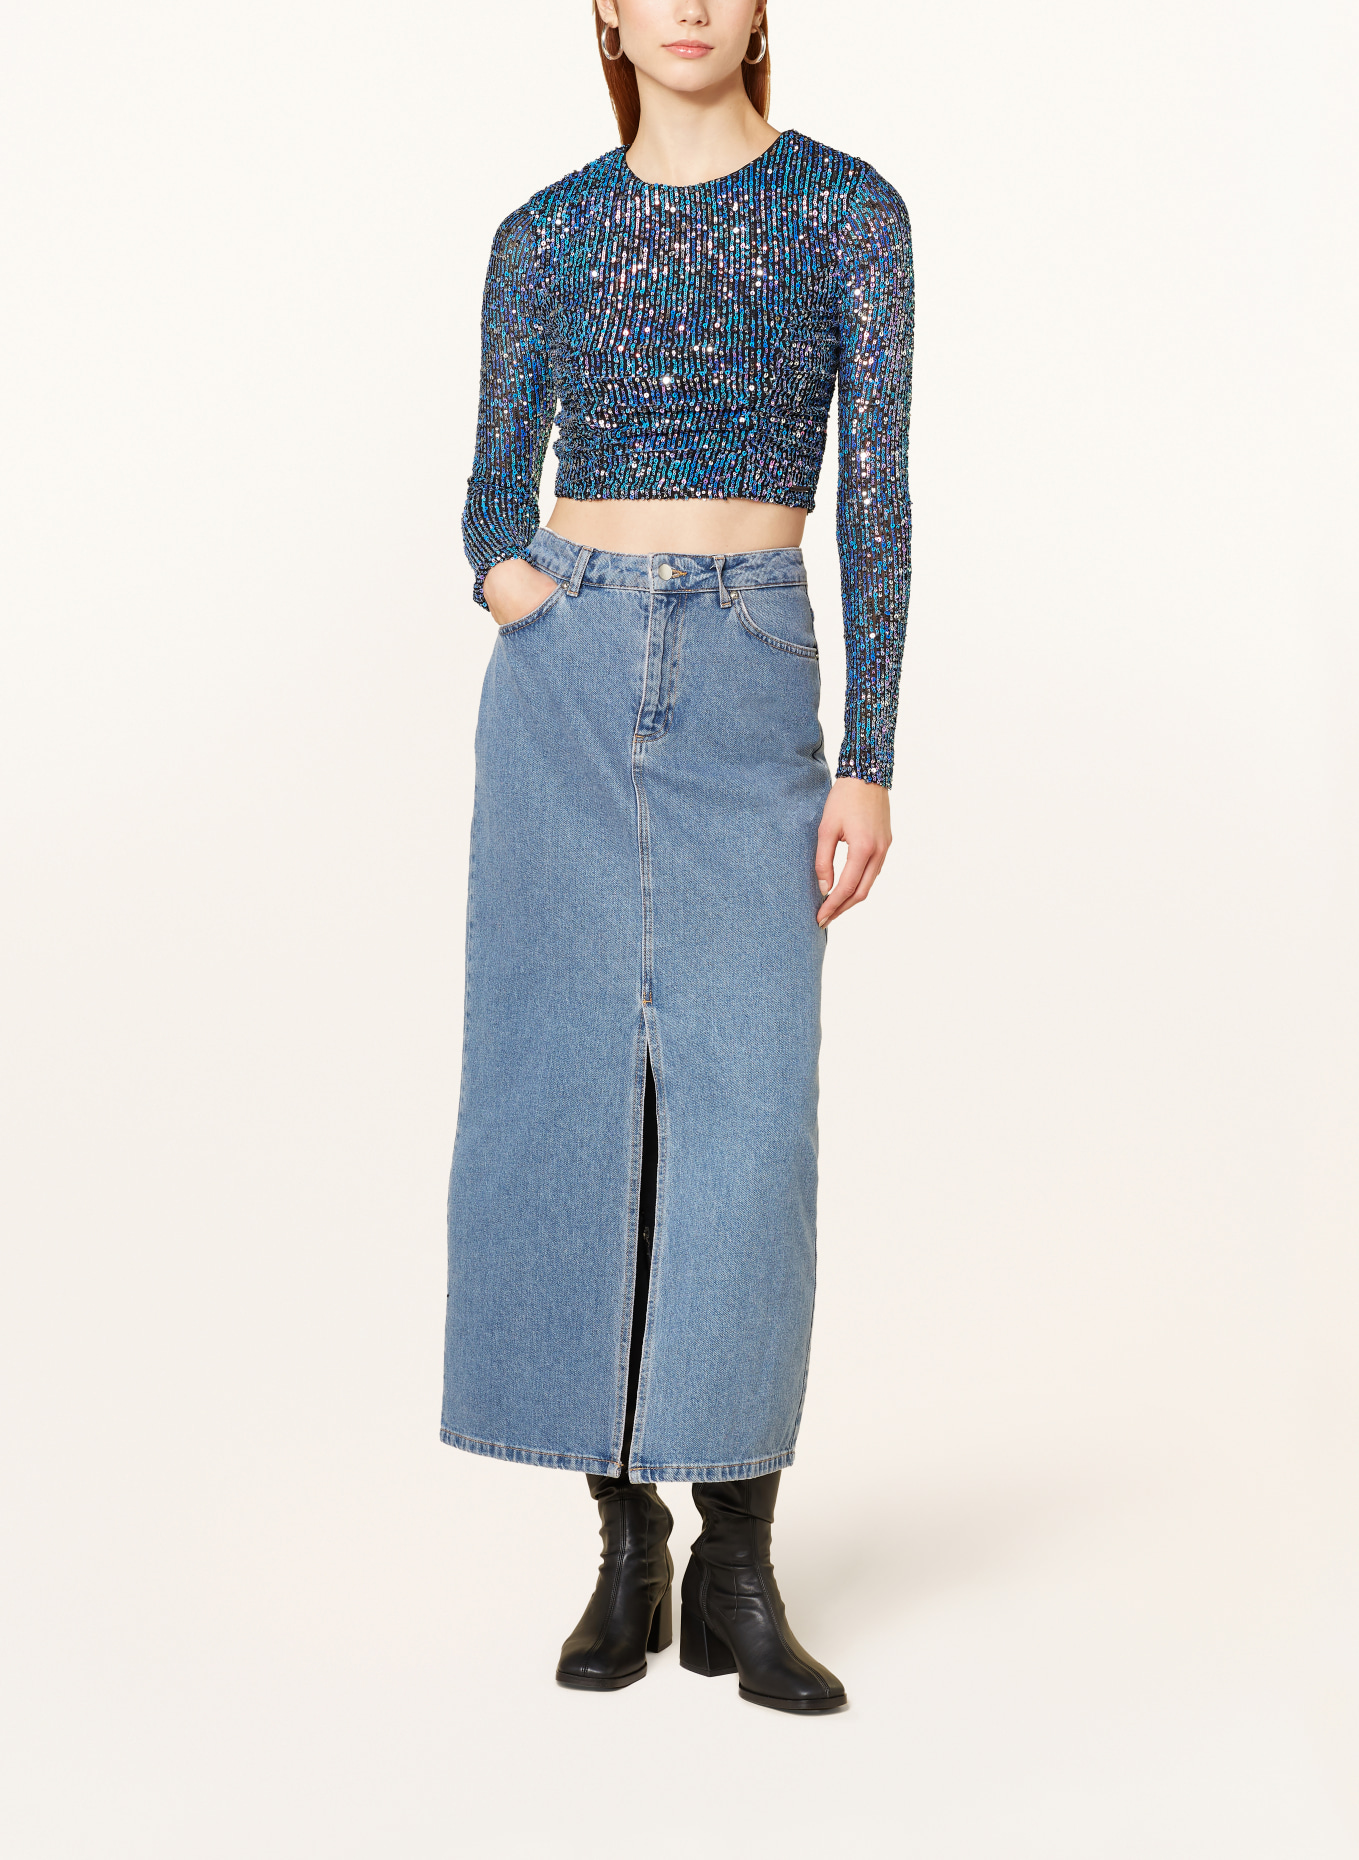 COLOURFUL REBEL Cropped shirt RIVER with sequins, Color: BLUE/ BLACK/ PINK (Image 2)